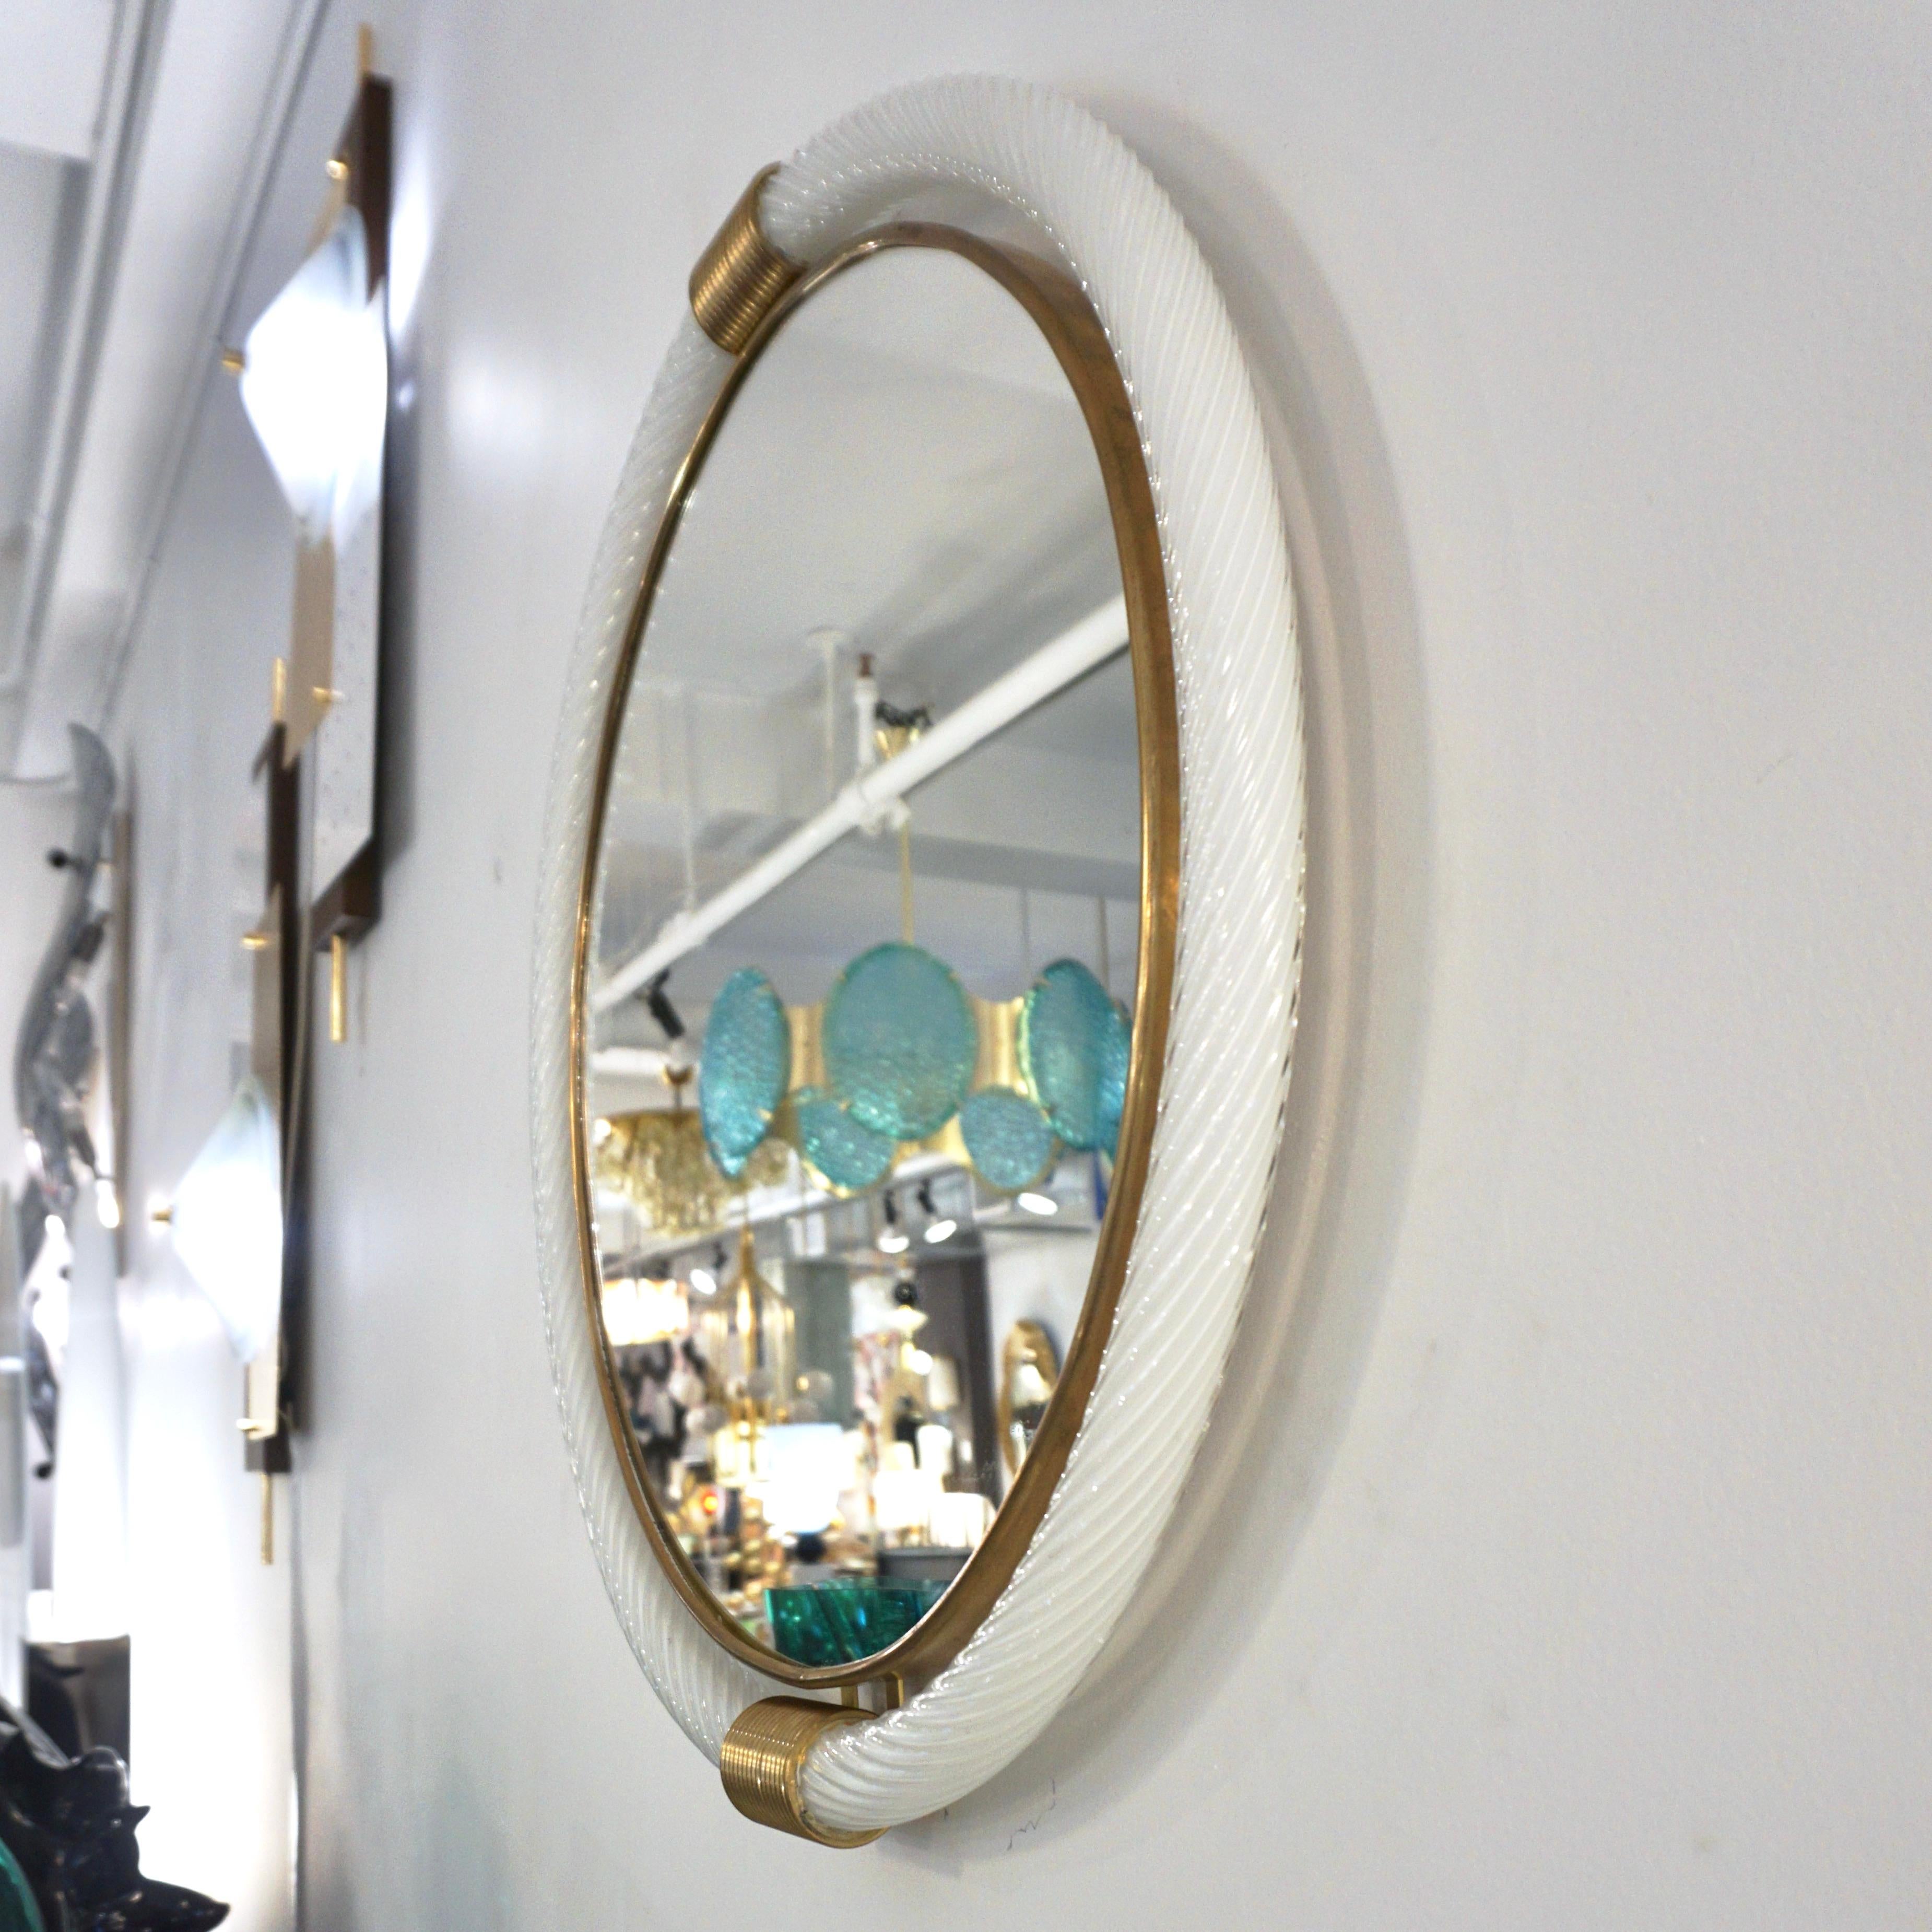 A unique organic round mirror attributed to Barovier & Toso, an ideal size as a solution to brighten up and enlarge a small space, entrance, powder room, office, corridor... The central mirror plate, edged in brass, is embraced by a blown Murano